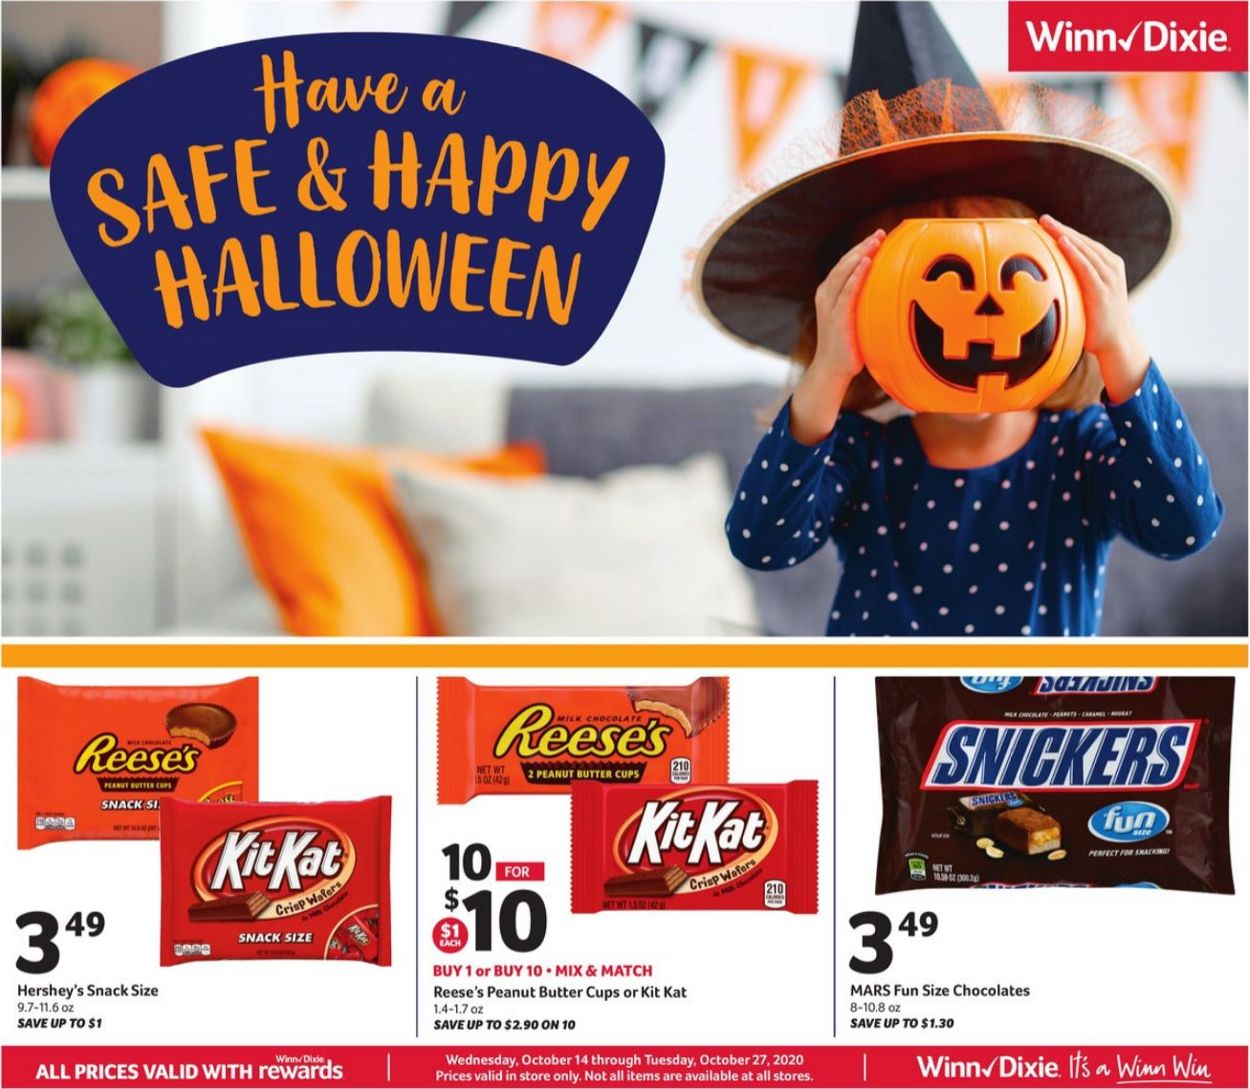 Winn Dixie Current weekly ad 10/14 - 10/27/2020 [8] - frequent-ads.com